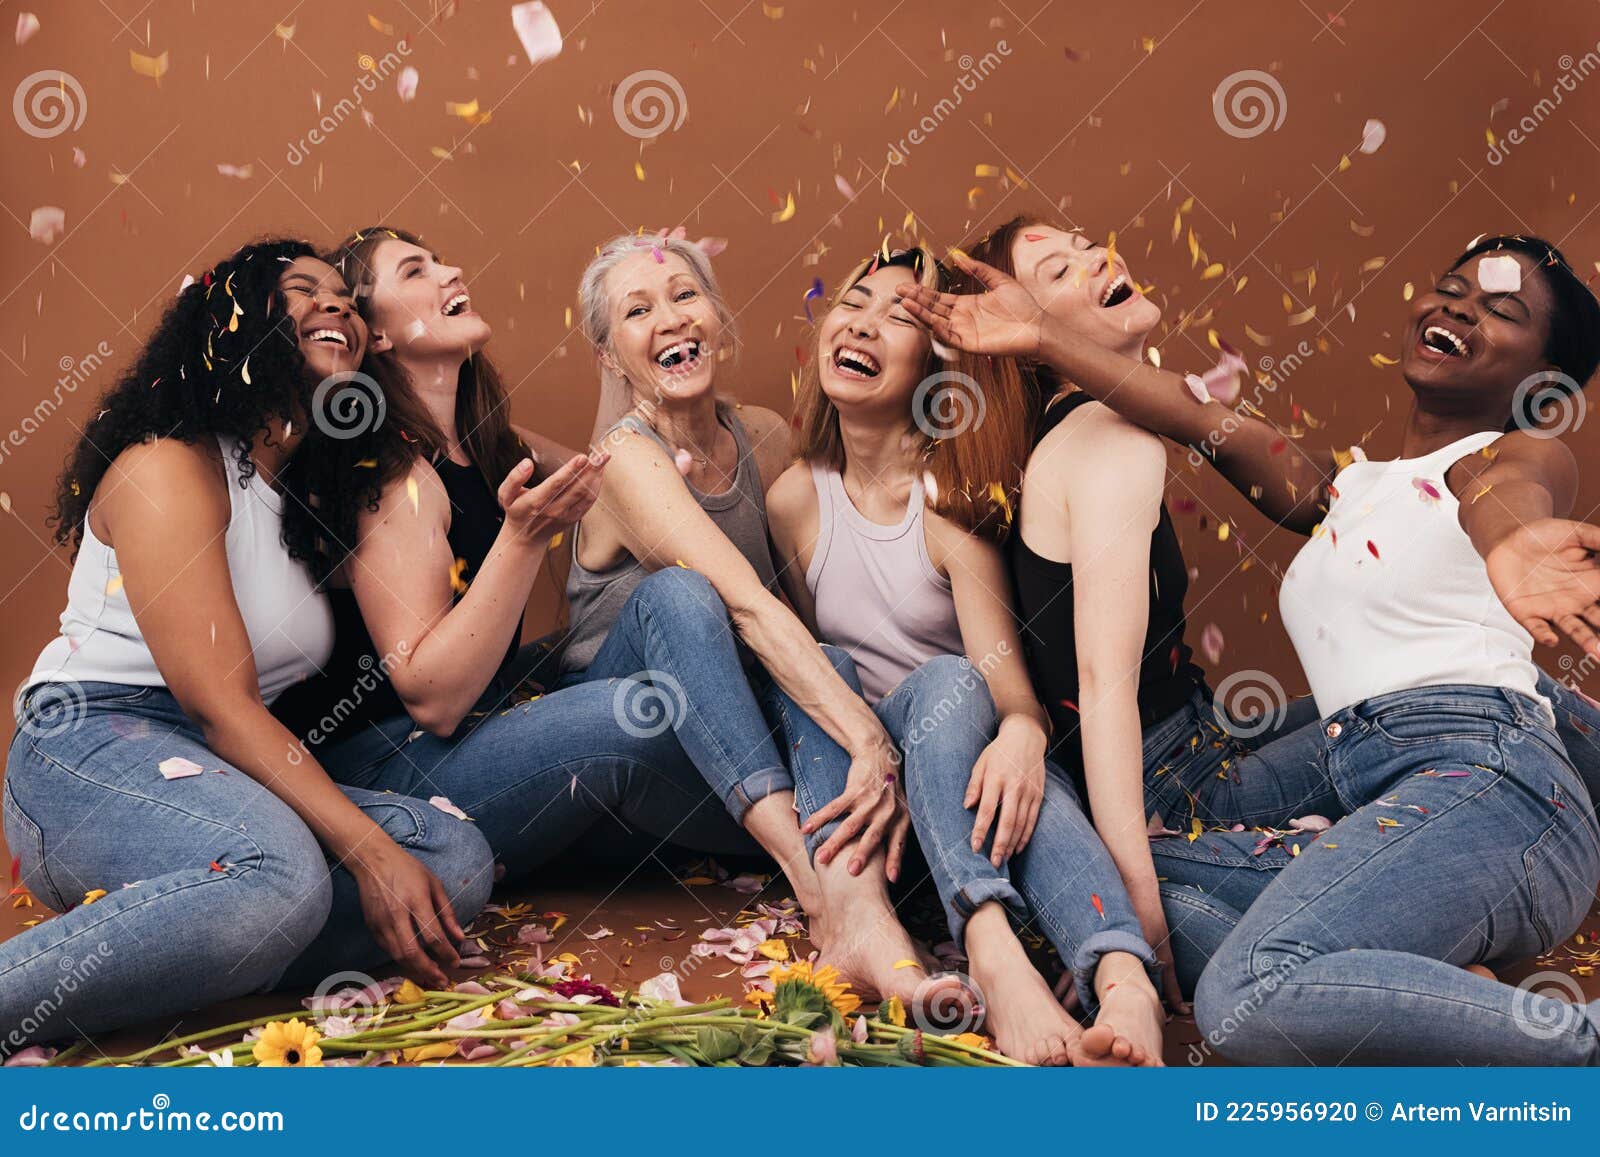 group of six laughing women of different ages sitting under falling flower petals. multi-ethnic smiling females having fun in